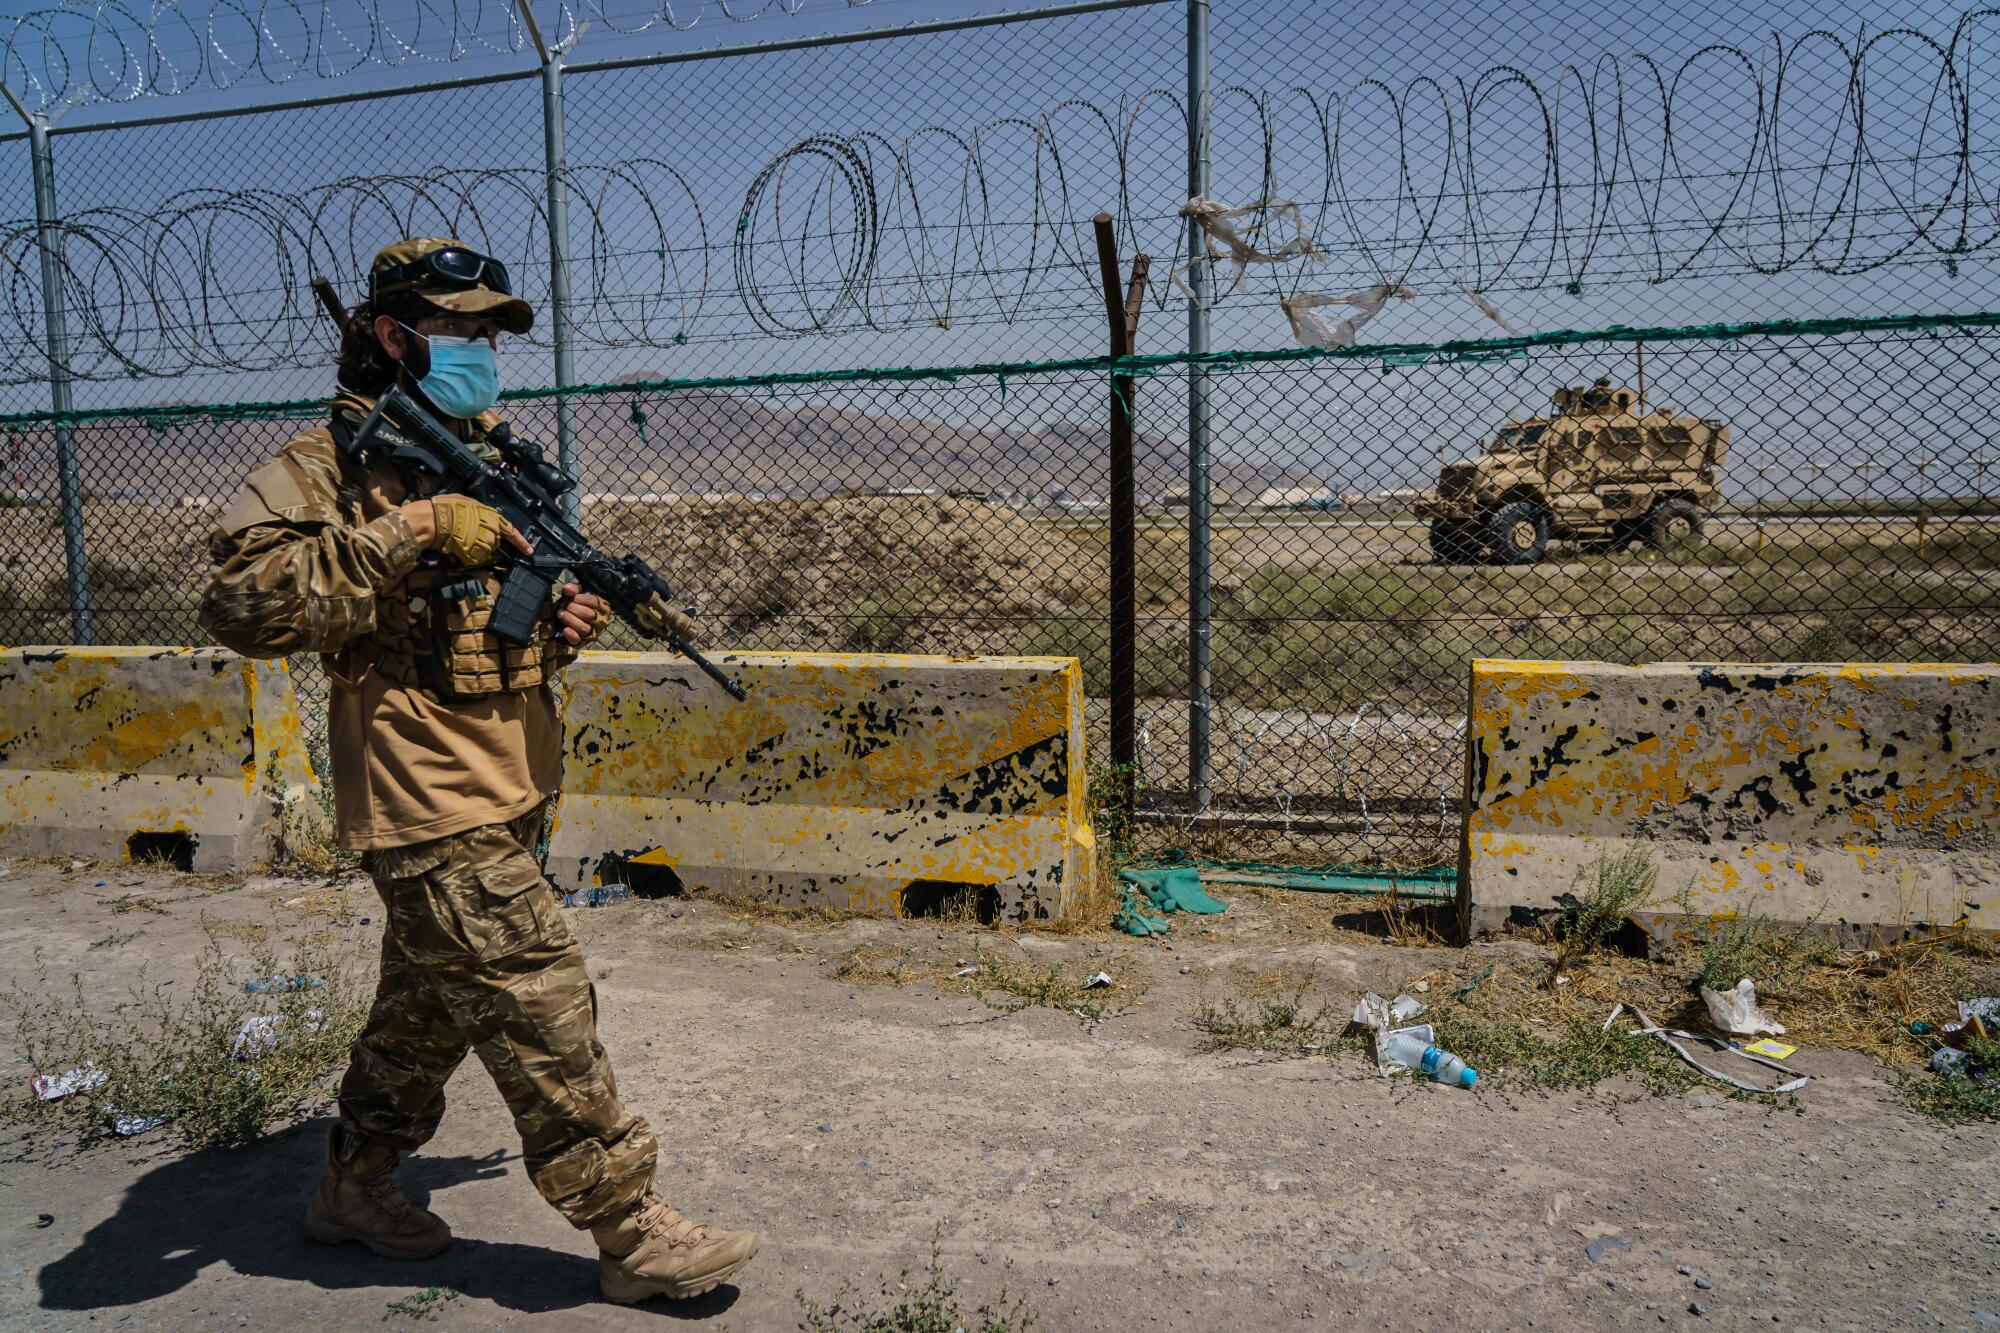 A masked man with a gun patrols outside the Kabul airport.